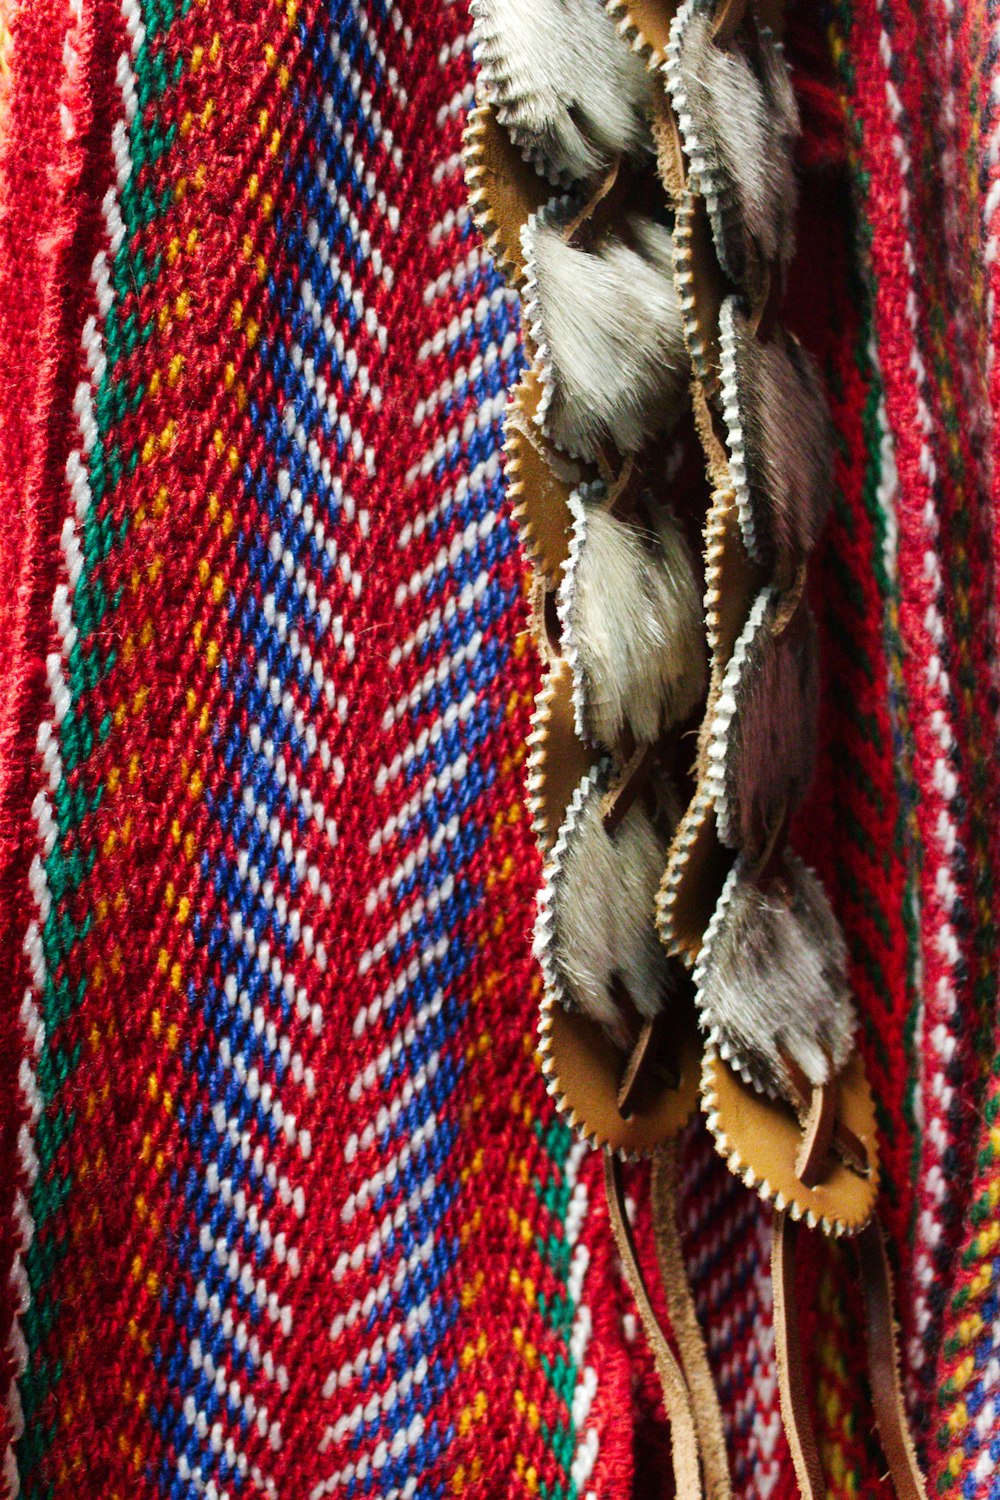 a close up of a knitted blanket with a tassel